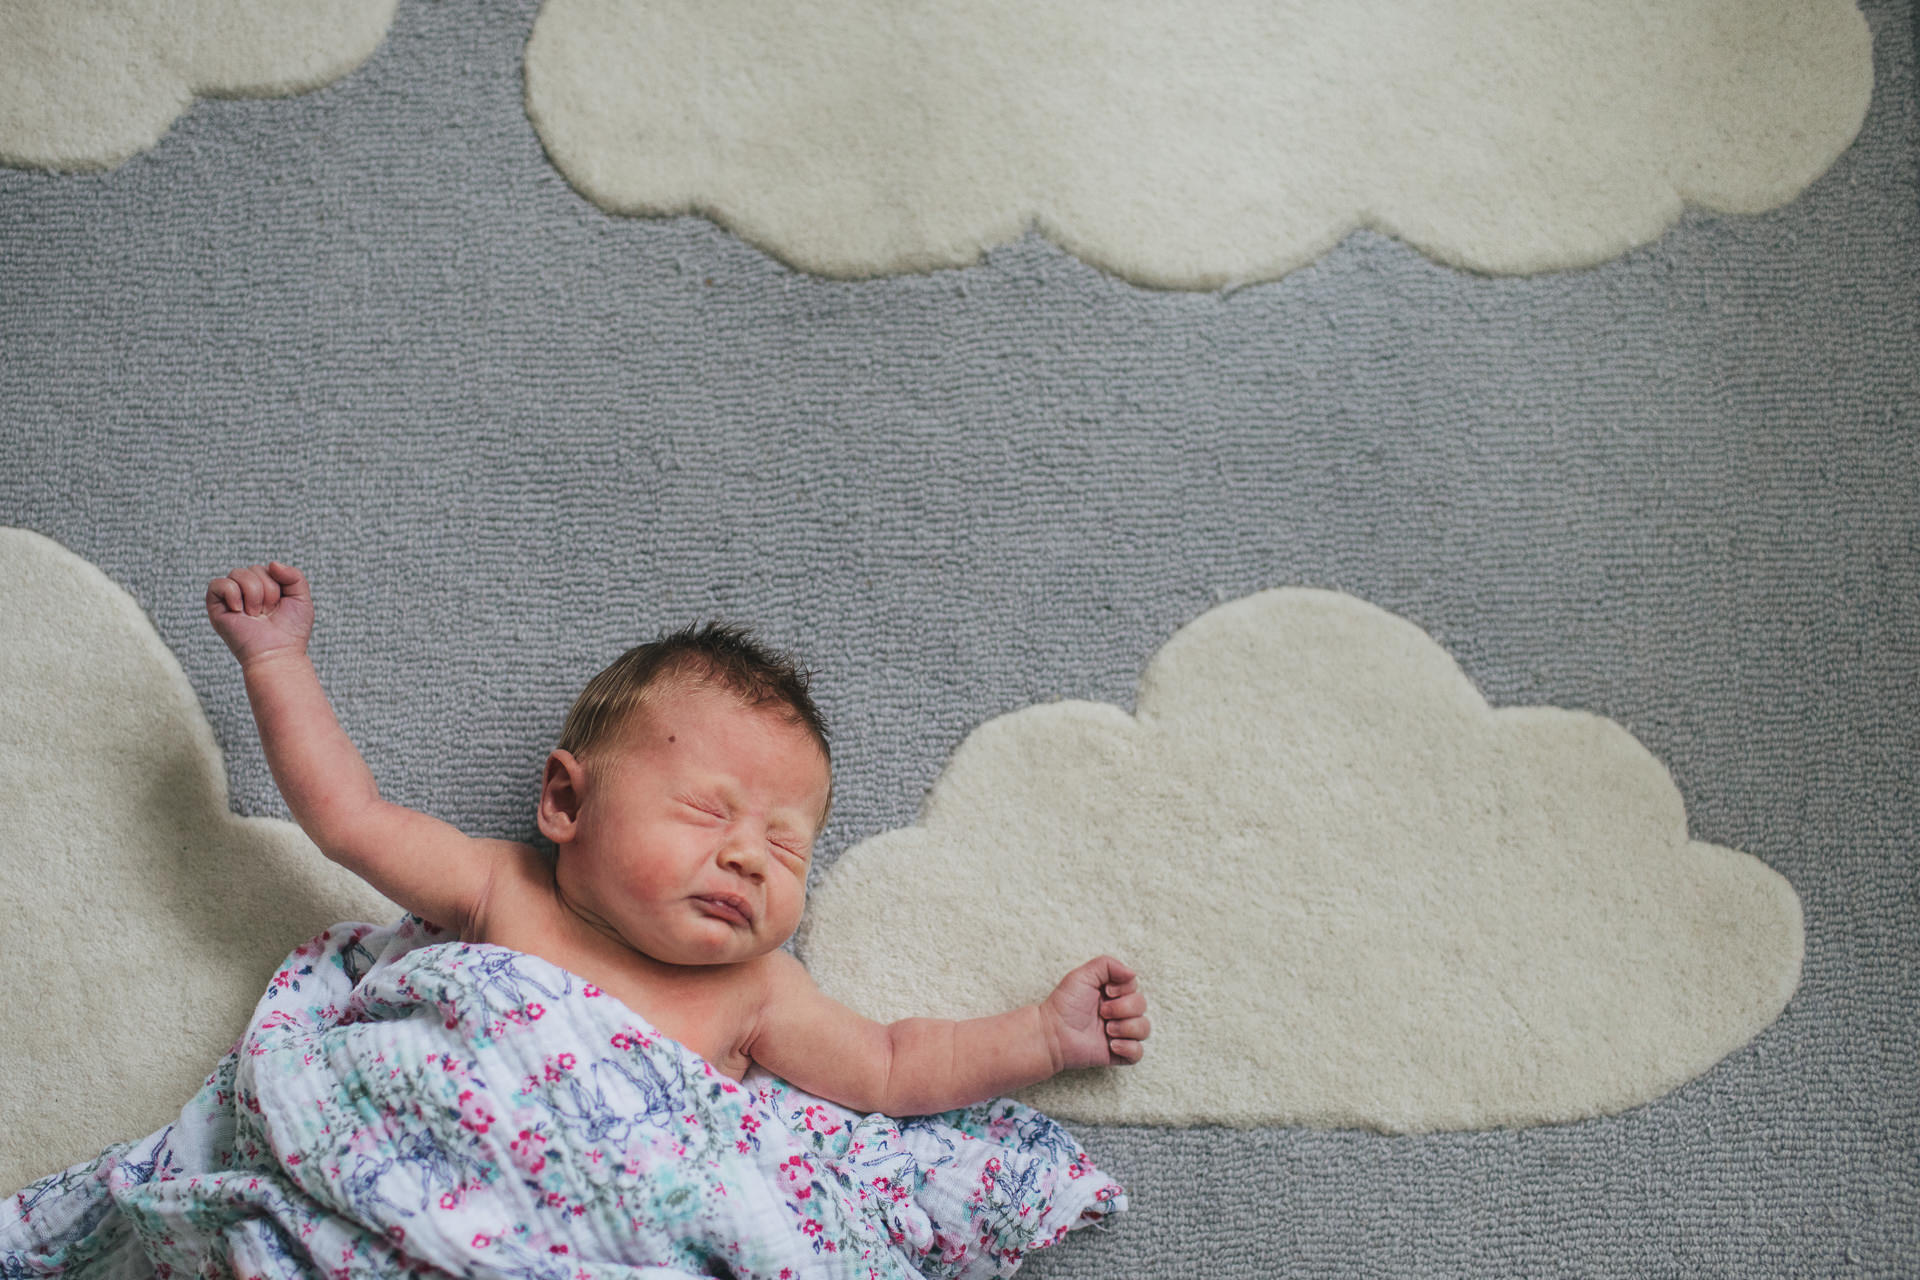 A newborn baby, sneezing on a rug of clouds